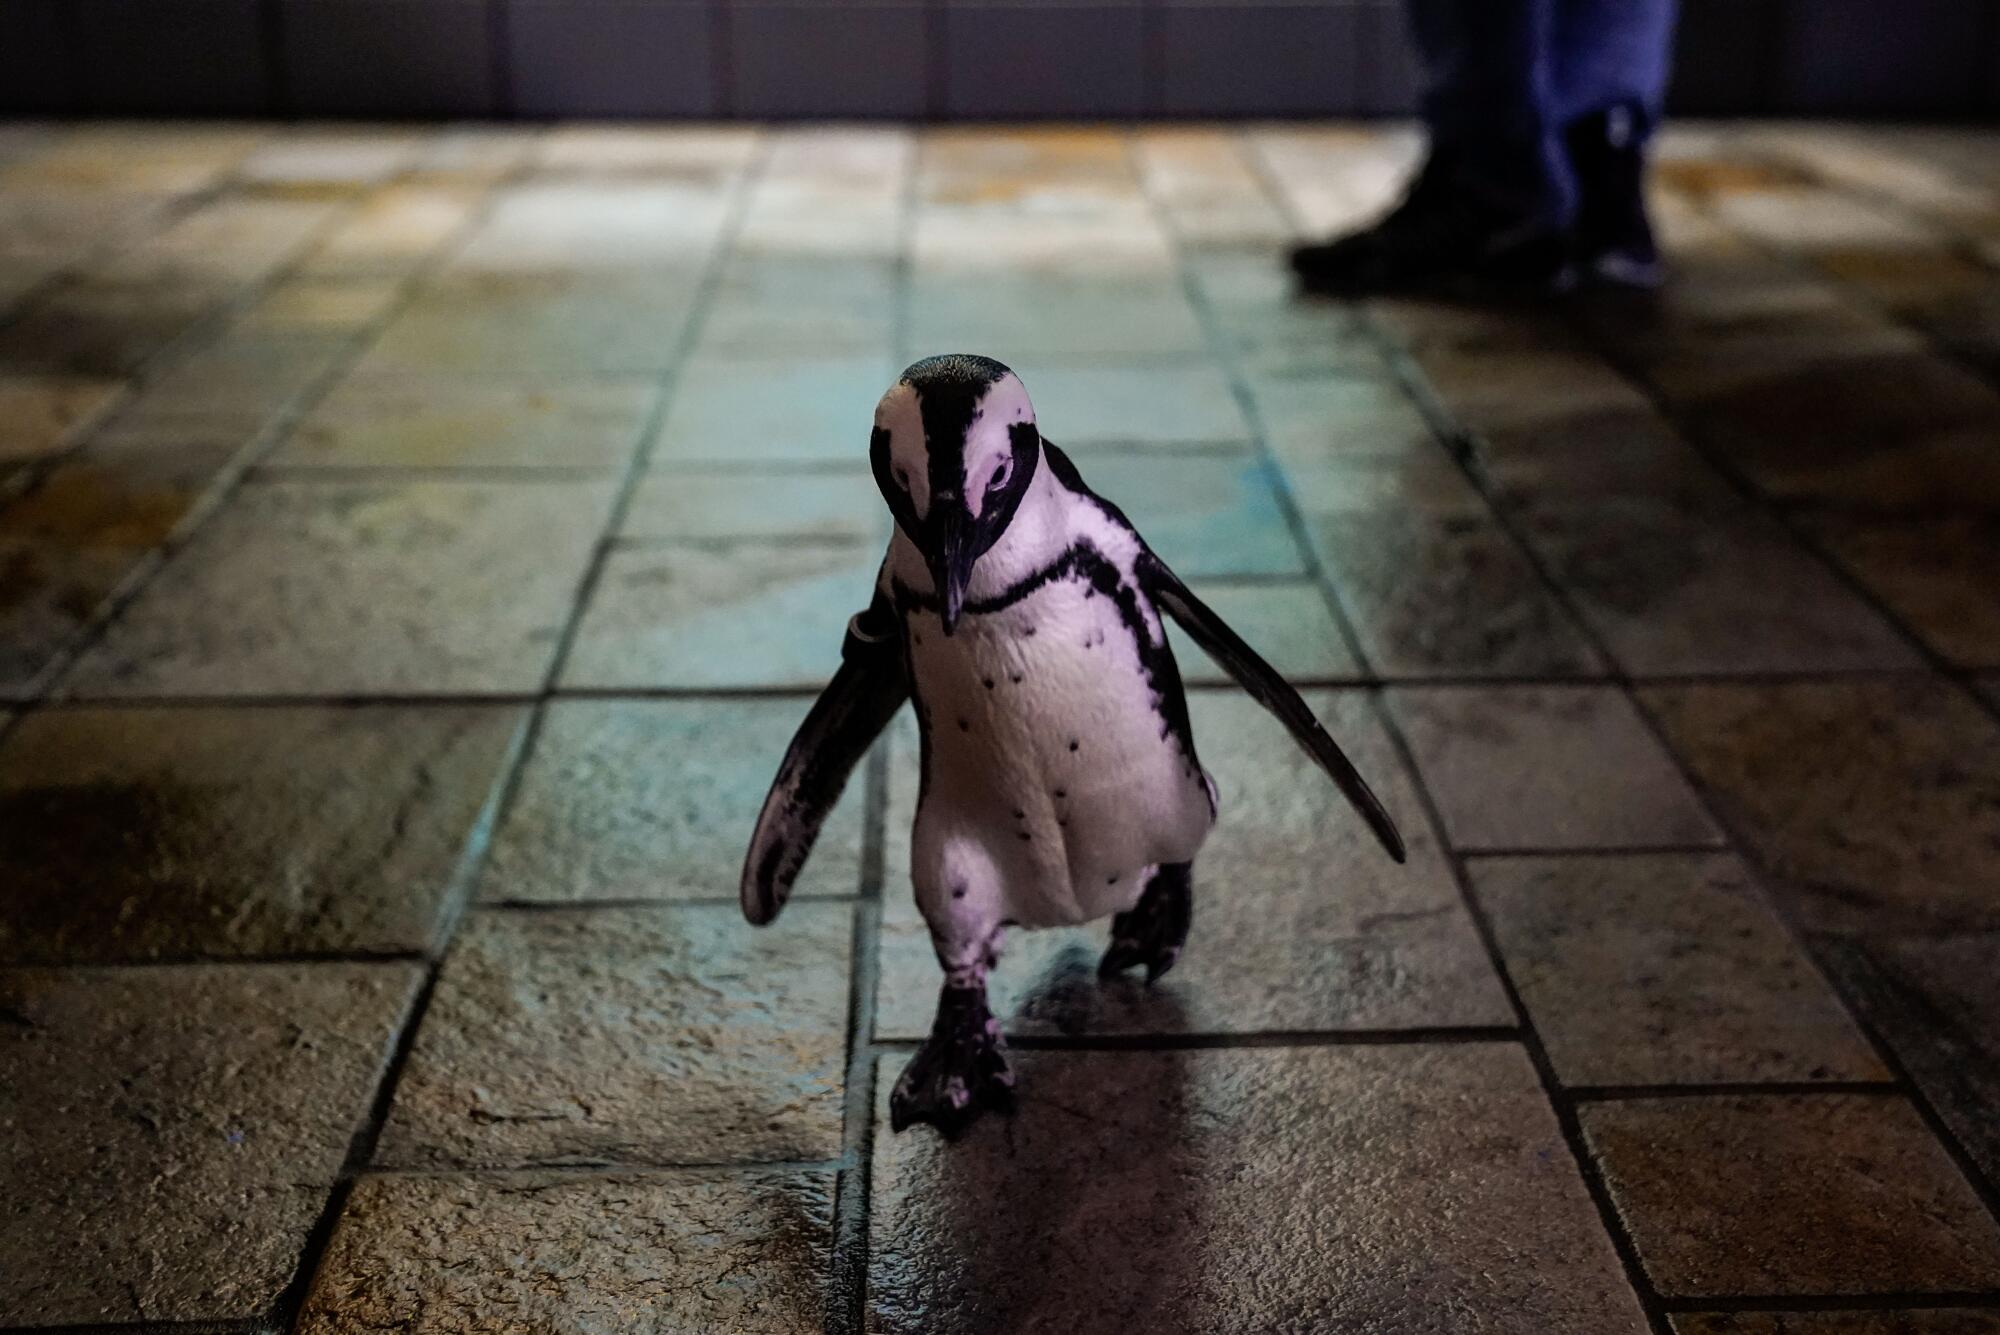 A small, black and white penguin waddles across a tile floor at Monterey Bay Aquarium